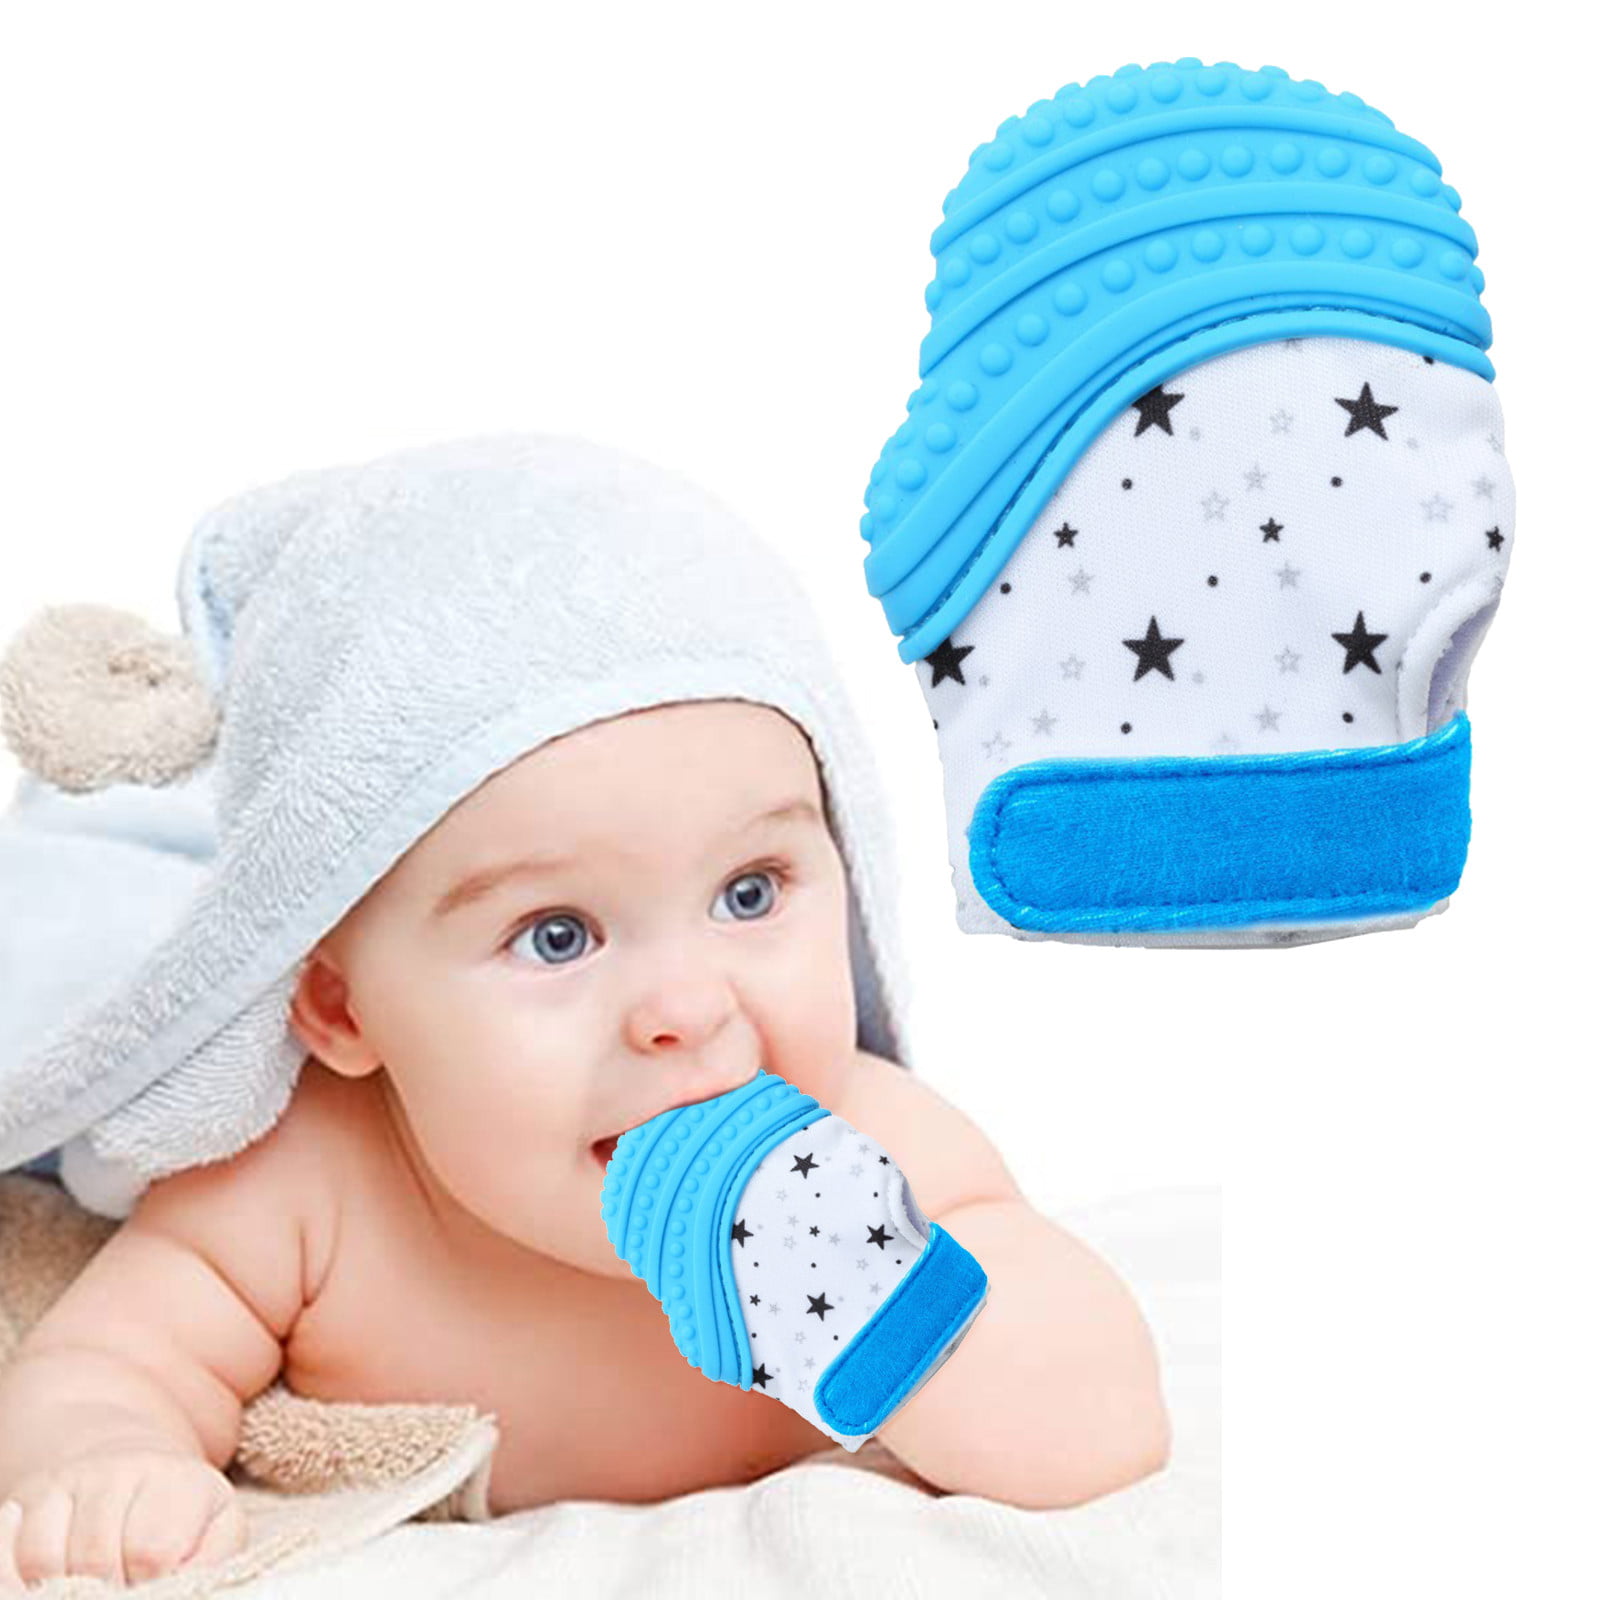 Baby Glove Stimulating Teether Toys for Child Baby Silicone Mitts Teething Mitten Cartoon Shaped Glove Soft Teether 